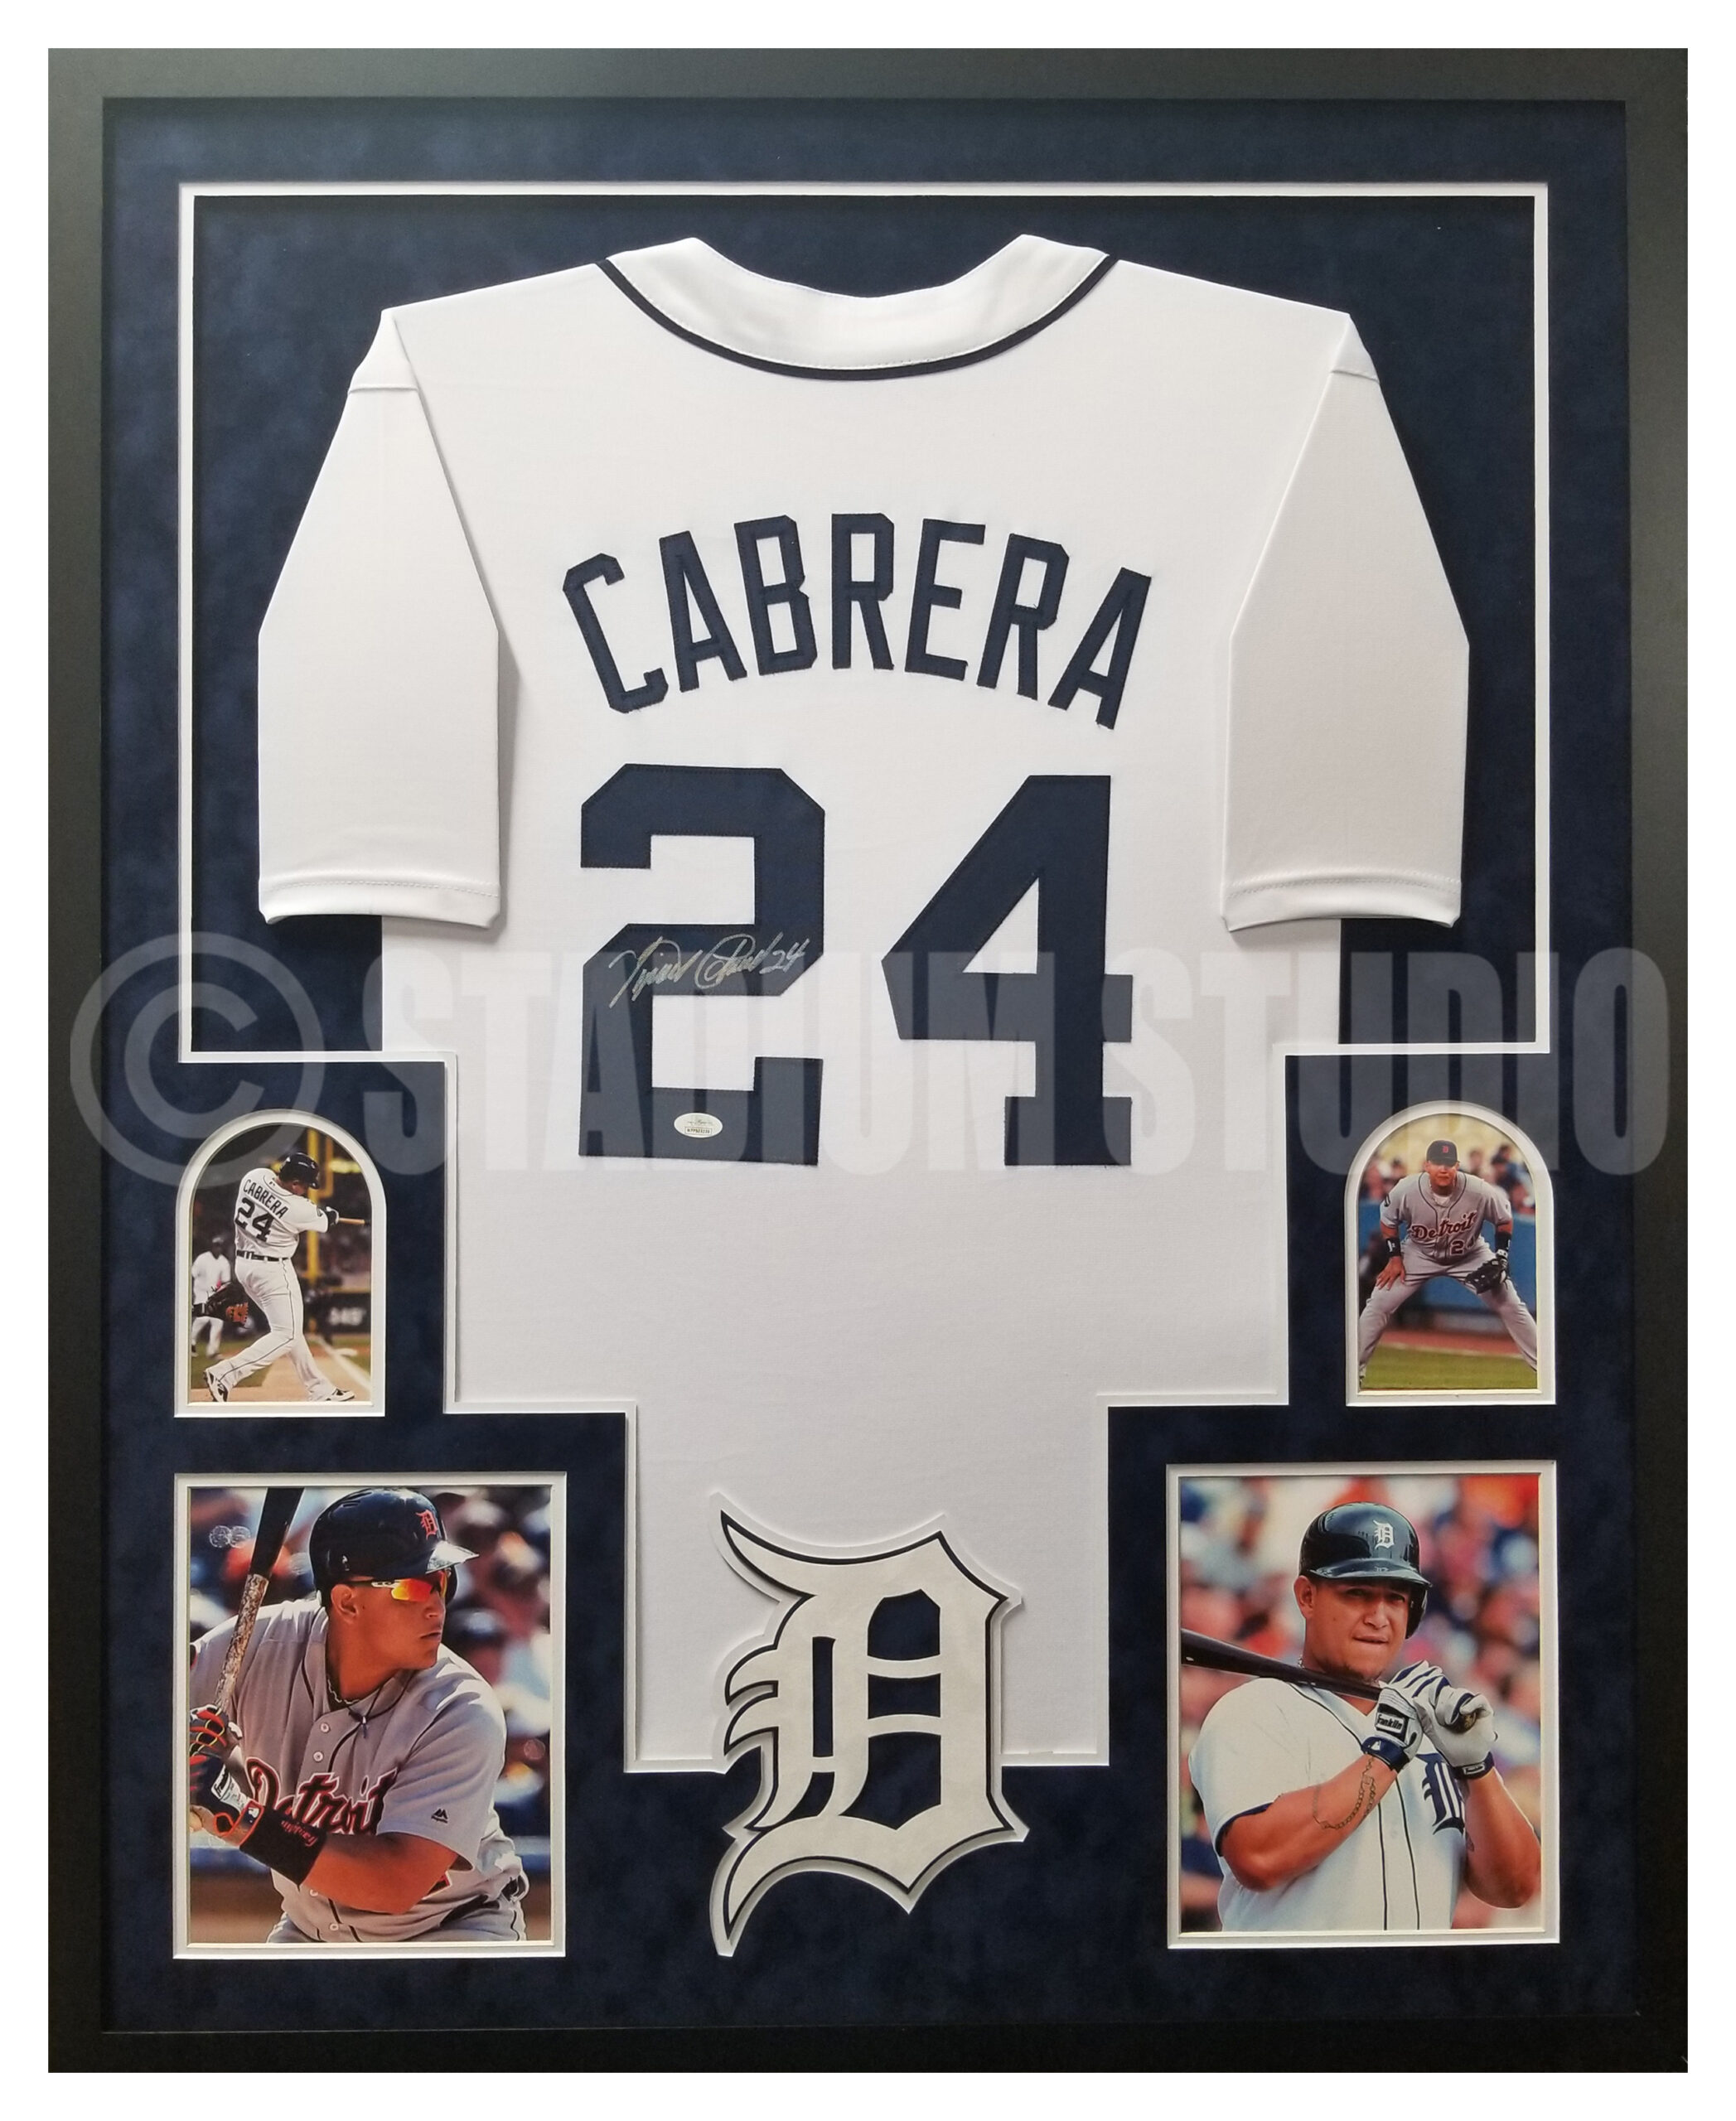 Miguel Cabrera Autographed Framed Tigers White Jersey - The Stadium Studio